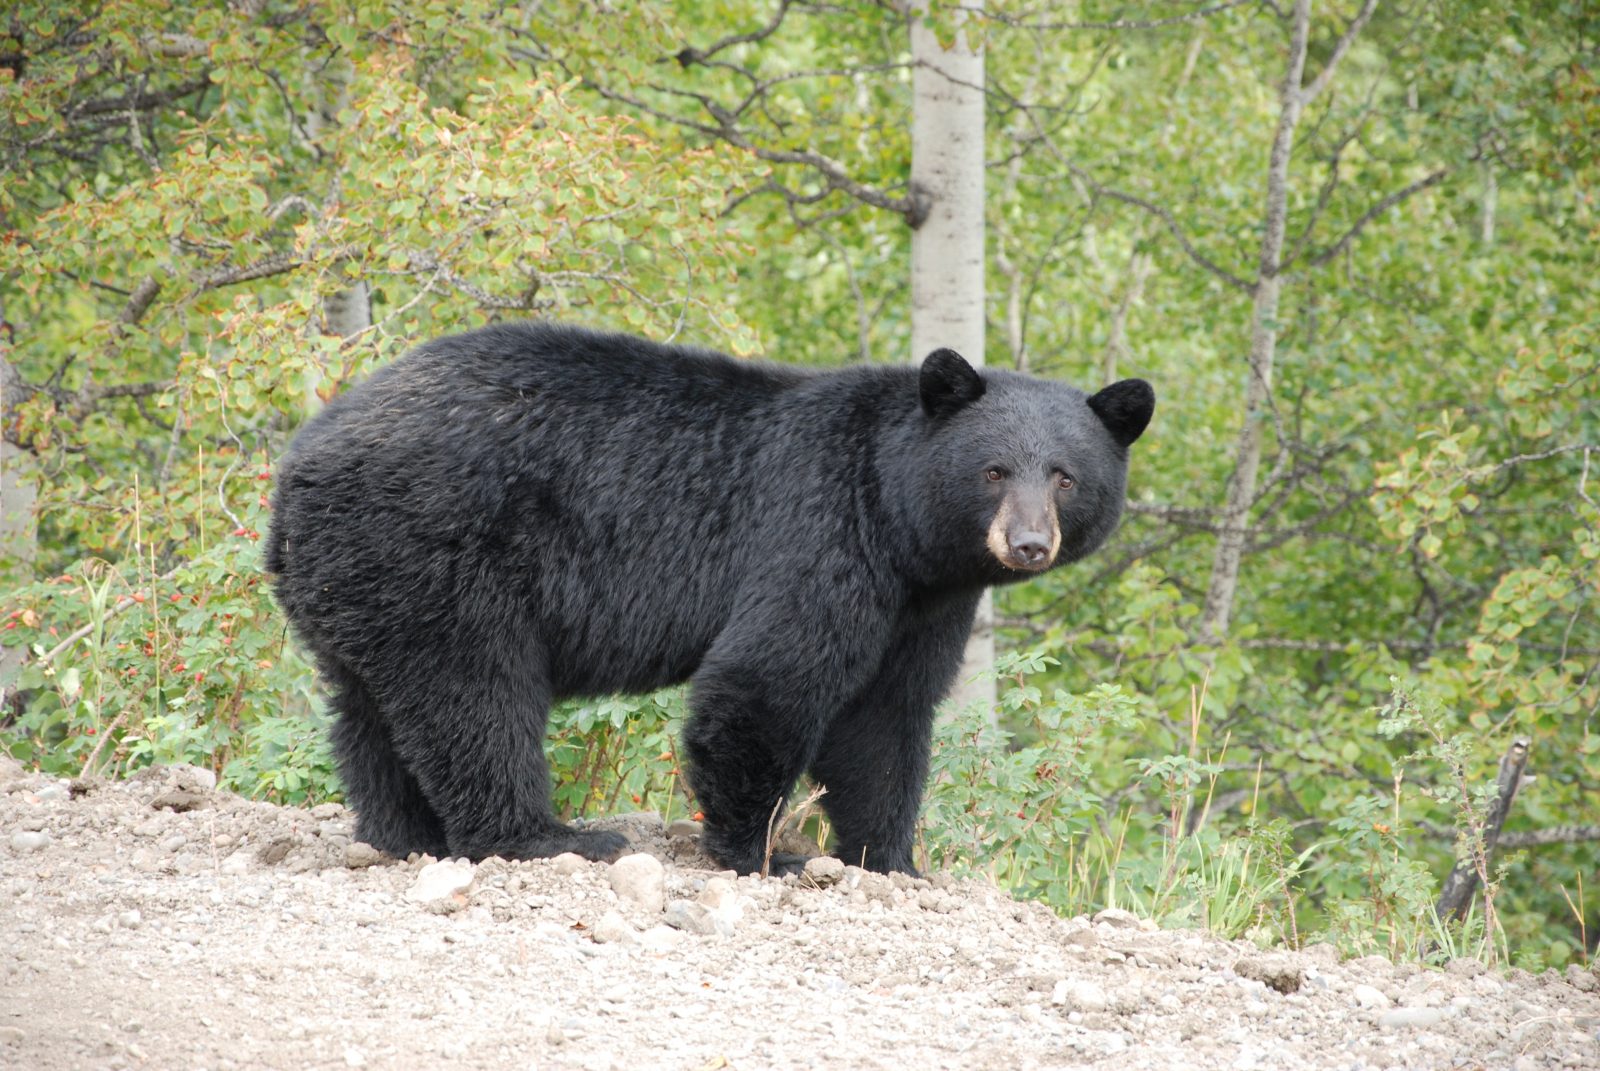 Bear sightings not uncommon this time of year: MNR